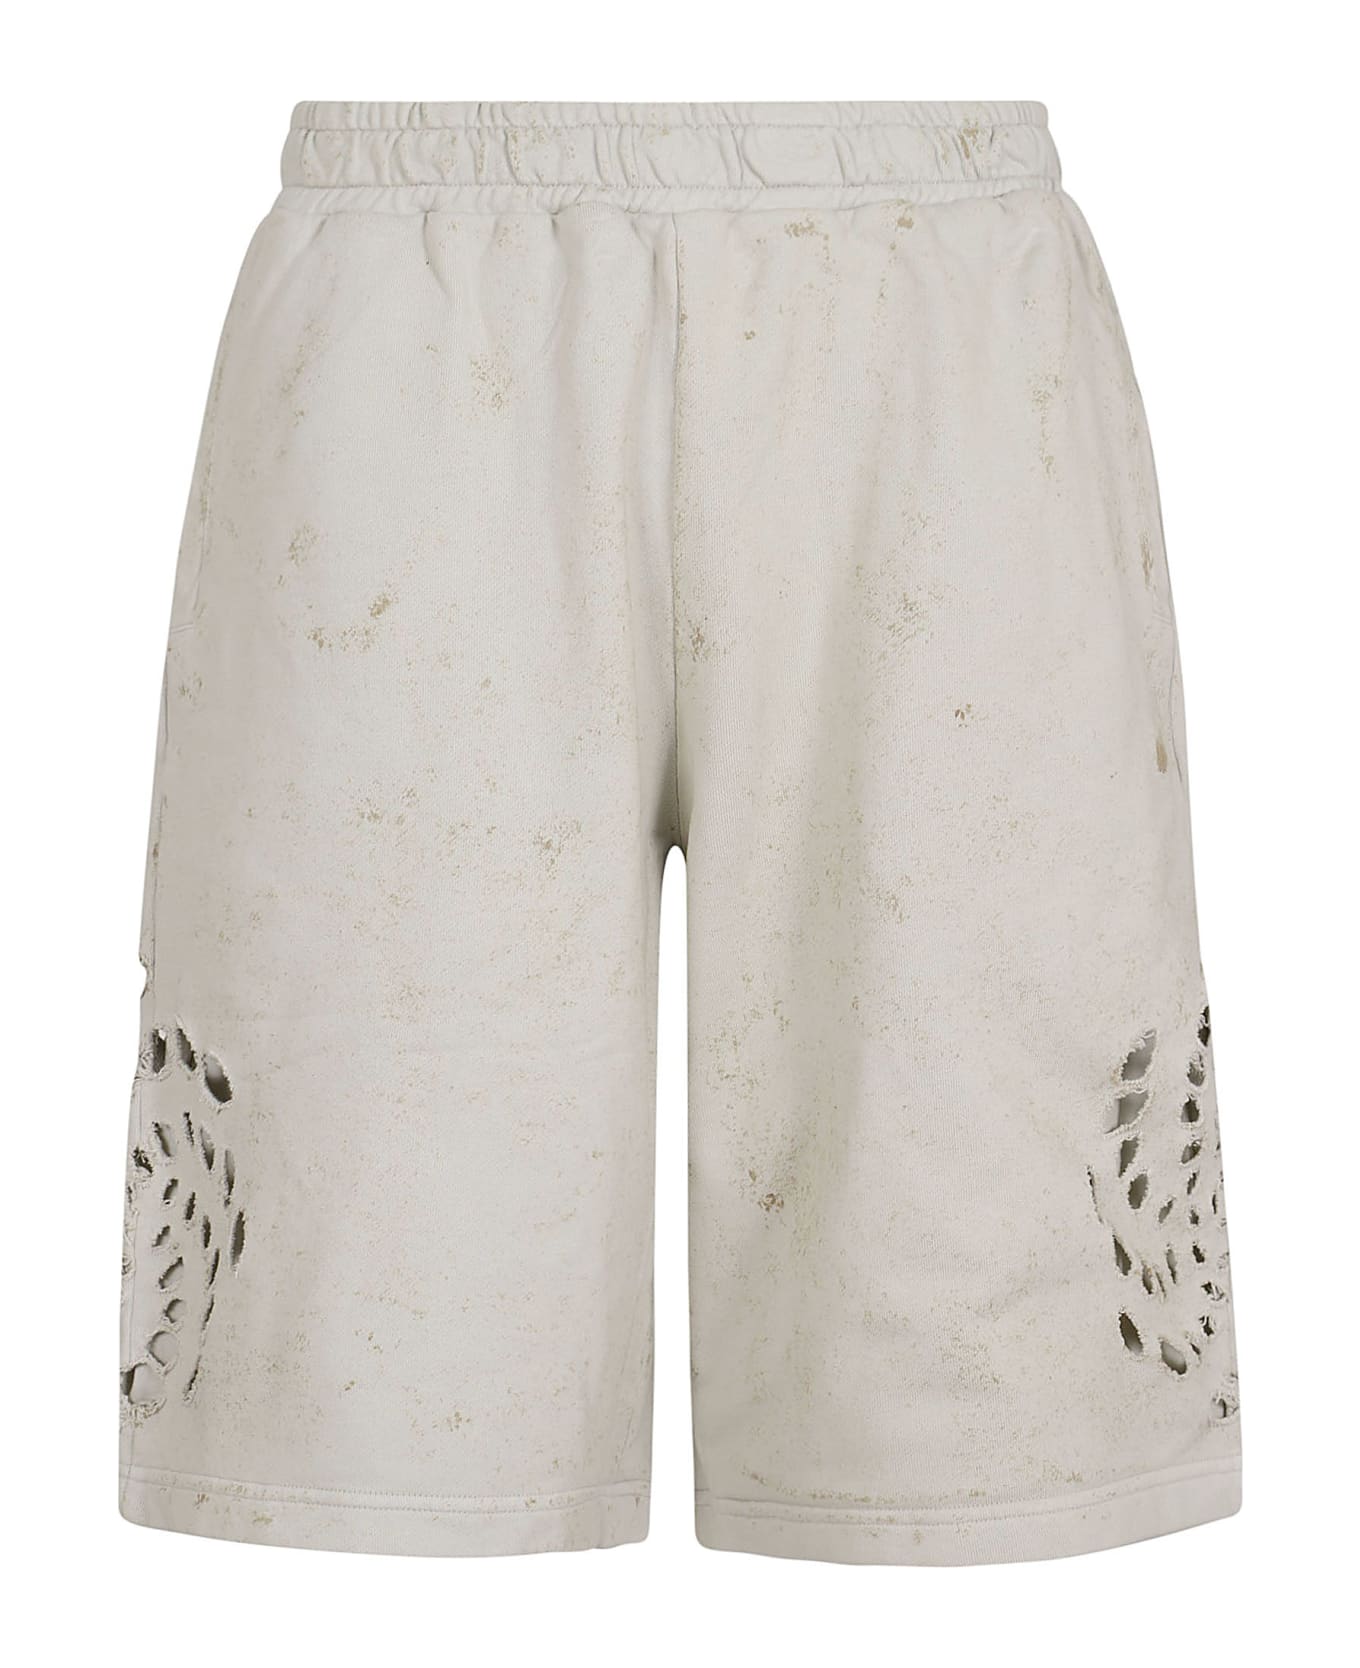 44 Label Group Trip Short Jersey - Dirty White Gyps